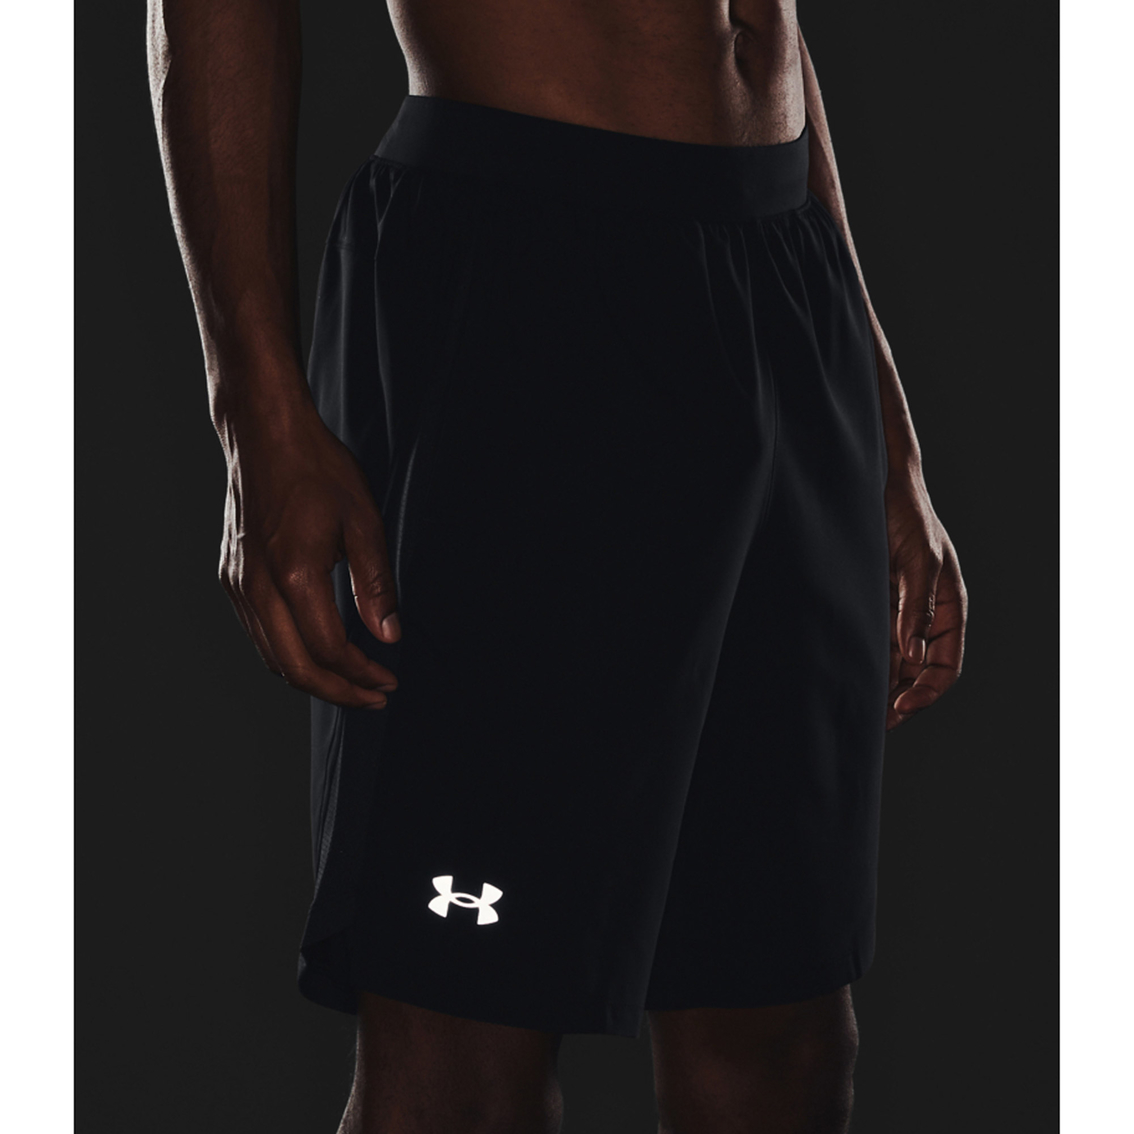 Under Armour Launch SW 9 in. Shorts - Image 4 of 6